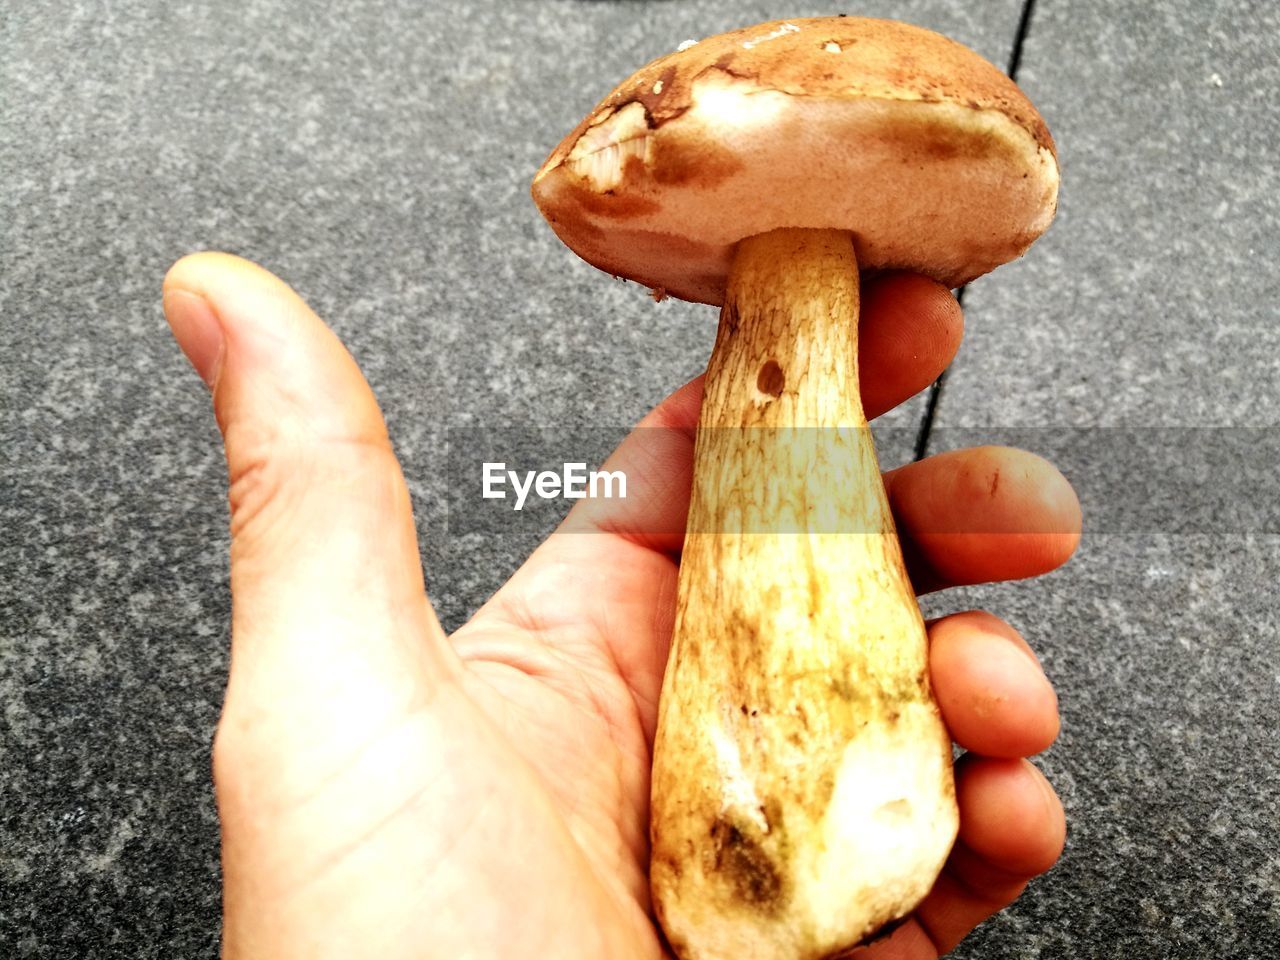 CLOSE-UP OF A HAND HOLDING MUSHROOMS